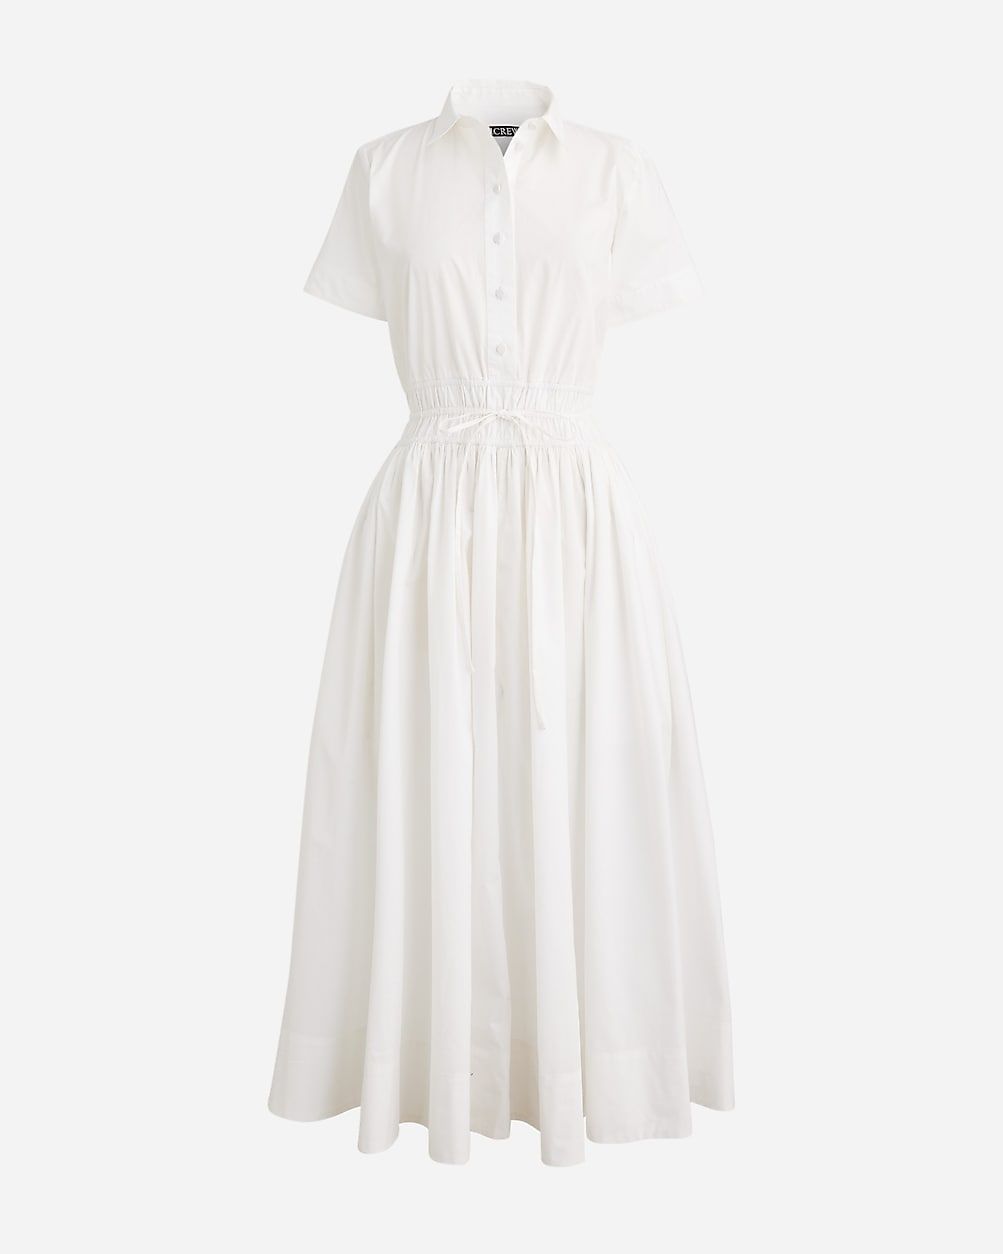 How to wear itbest seller4.6(151 REVIEWS)Elena shirtdress in cotton poplin$168.00Select Colors$10... | J.Crew US